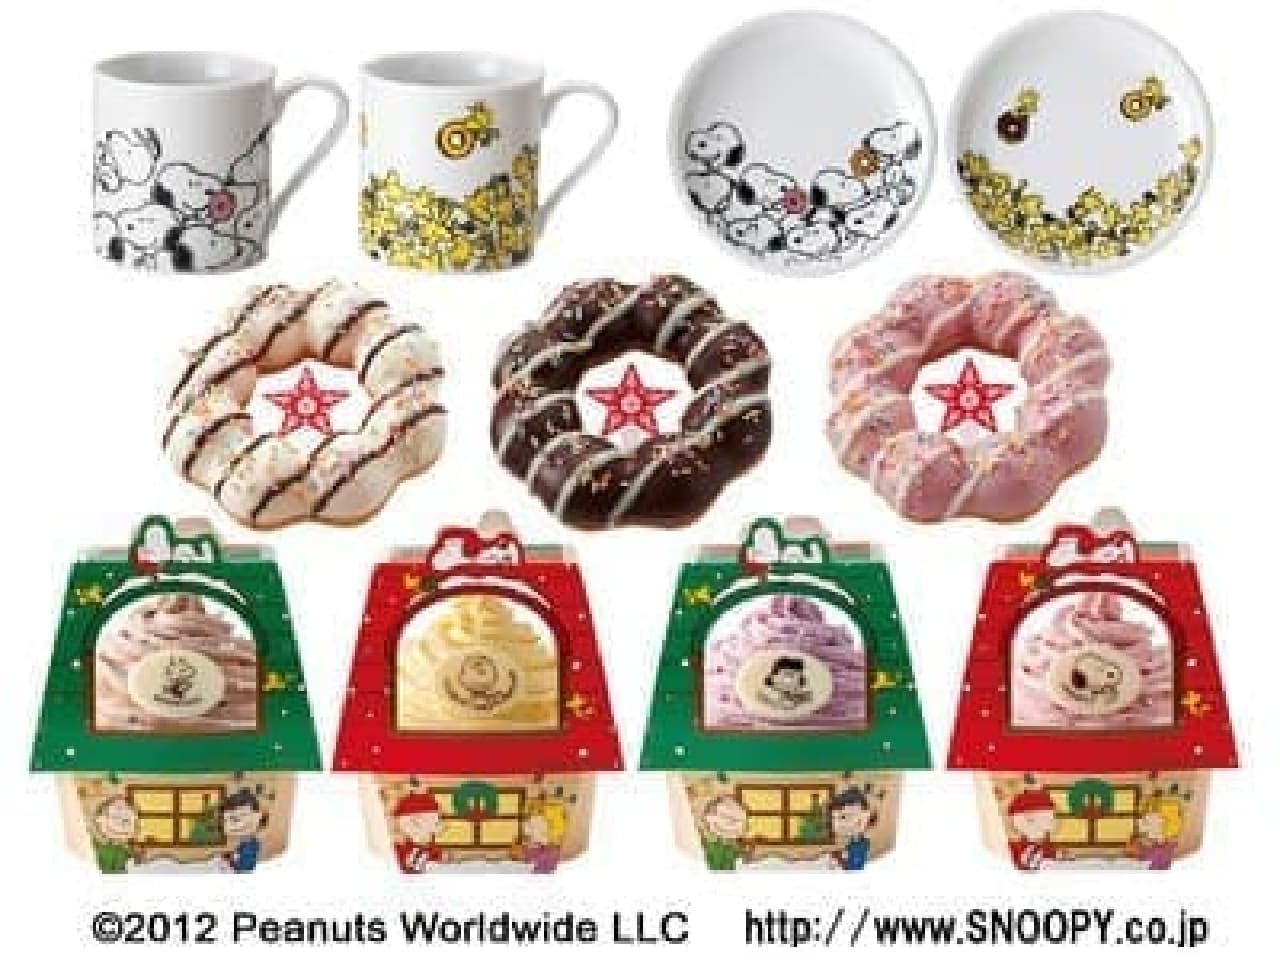 Mister Donut's Christmas limited items are on sale! Merry Christmas alone!